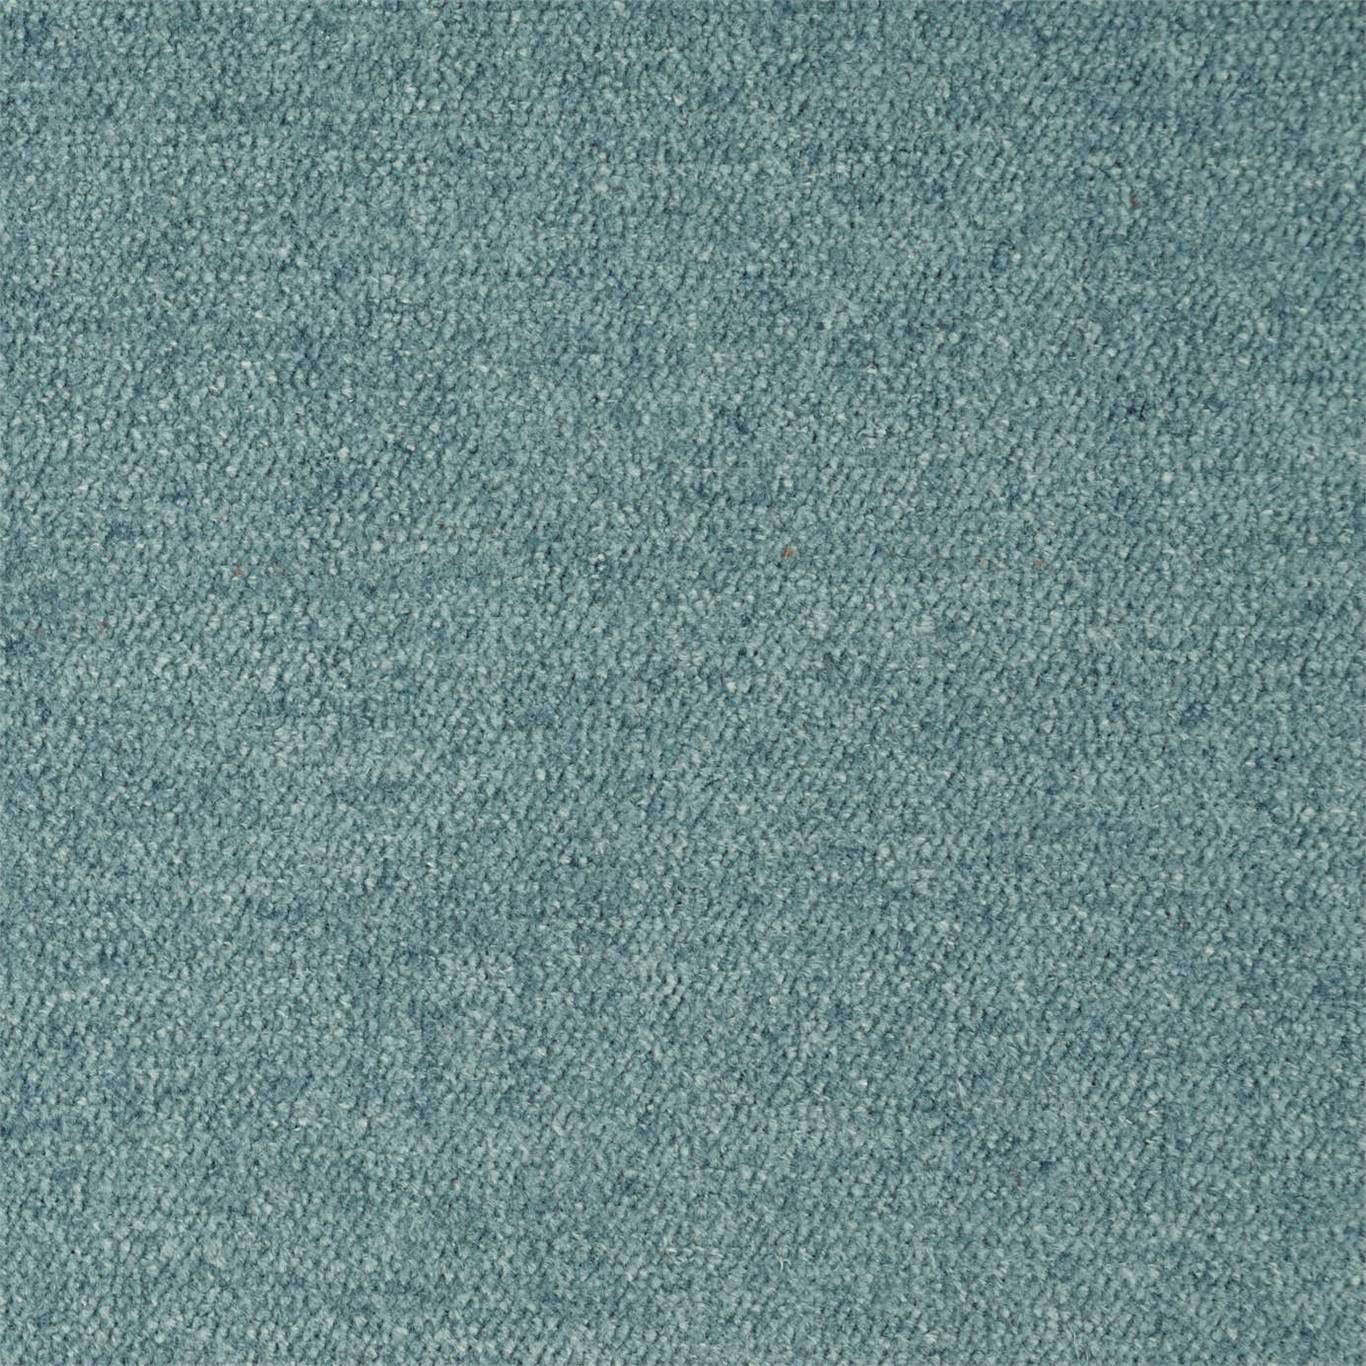 Marly Chenille Sea Blue Fabric by HAR